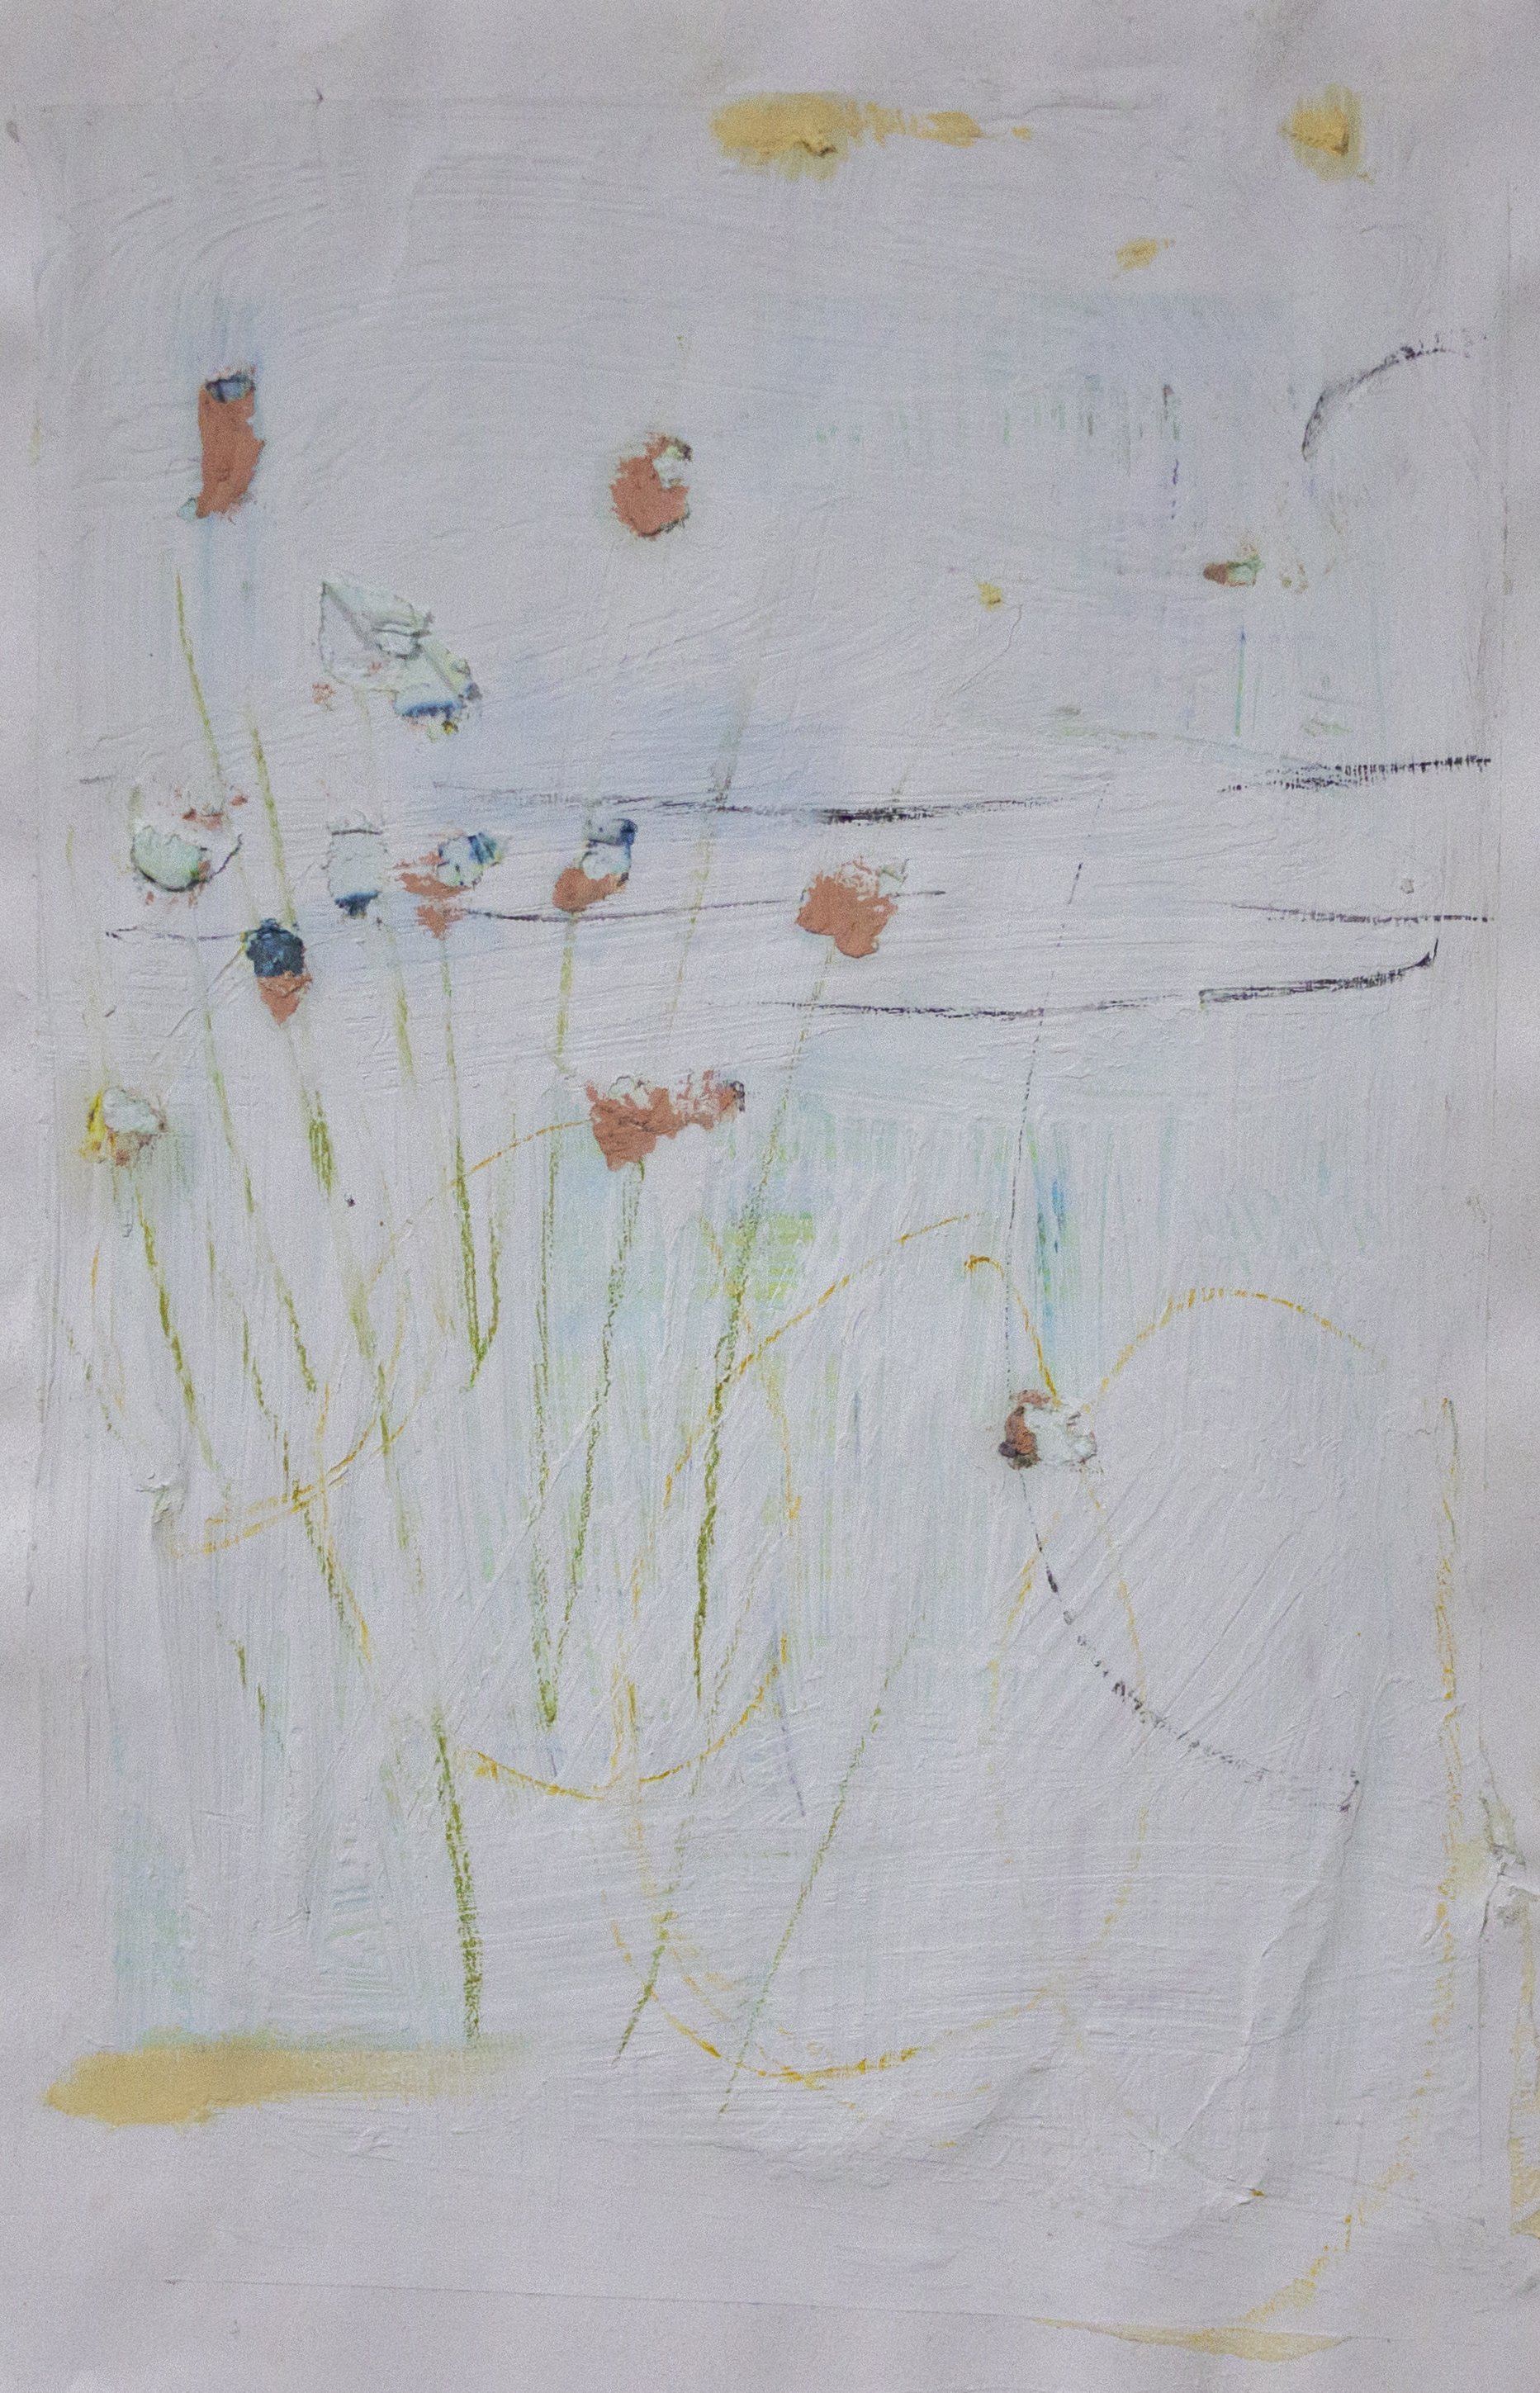   Bouquet Pourri , 2021  11 x 17 inches  Oil, Acrylic, Crayon, Pastel and Pencil on Paper 